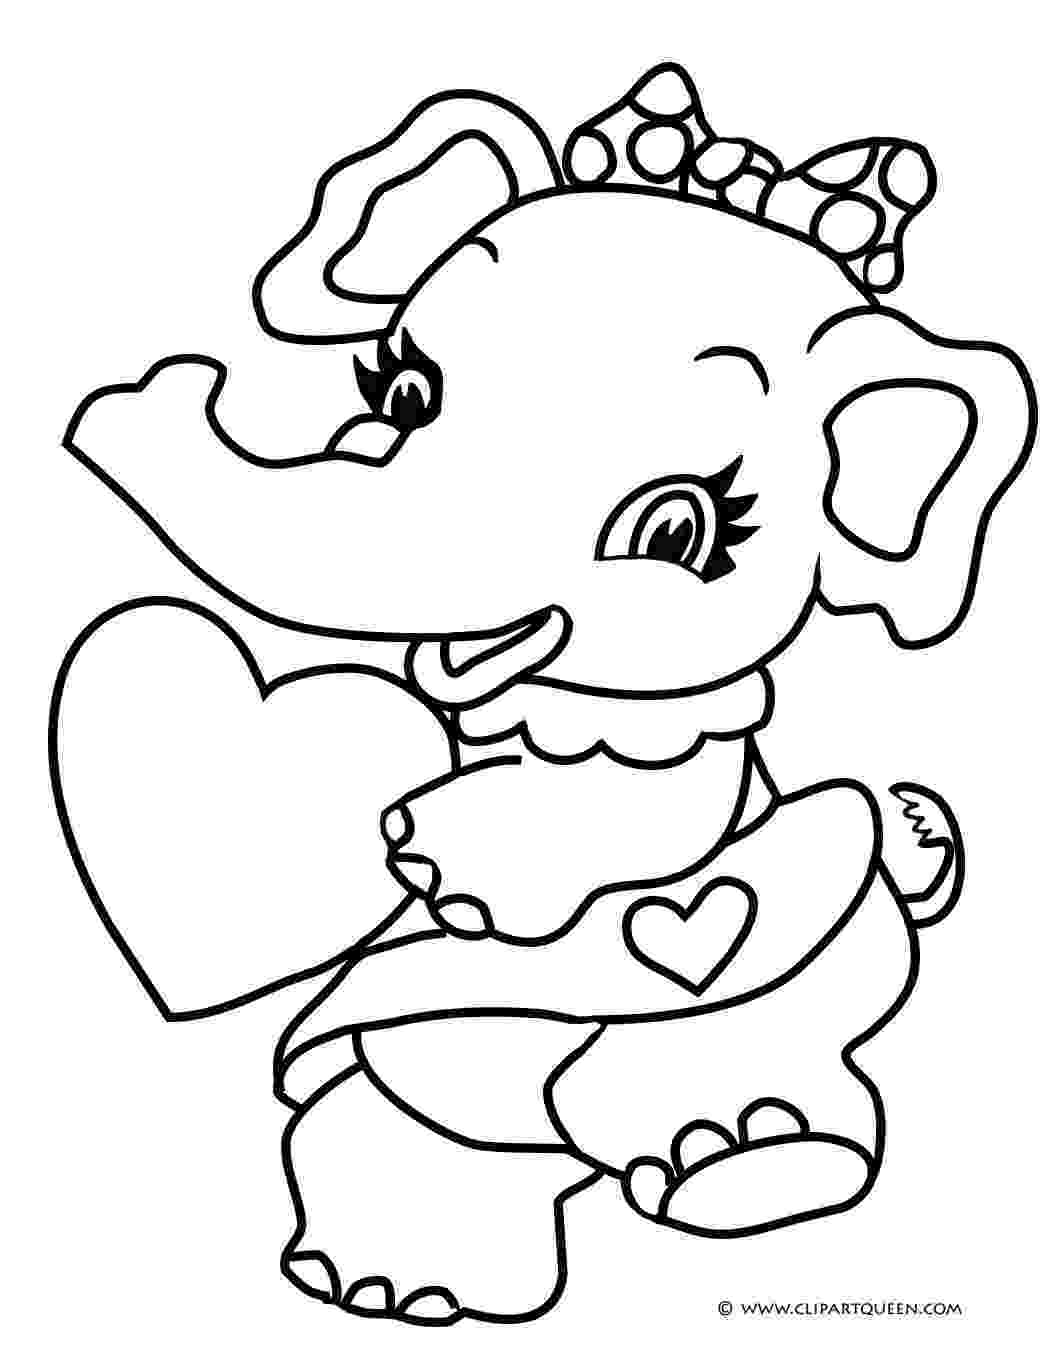 coloring pages valentines 15 valentine39s day coloring pages coloring valentines pages 